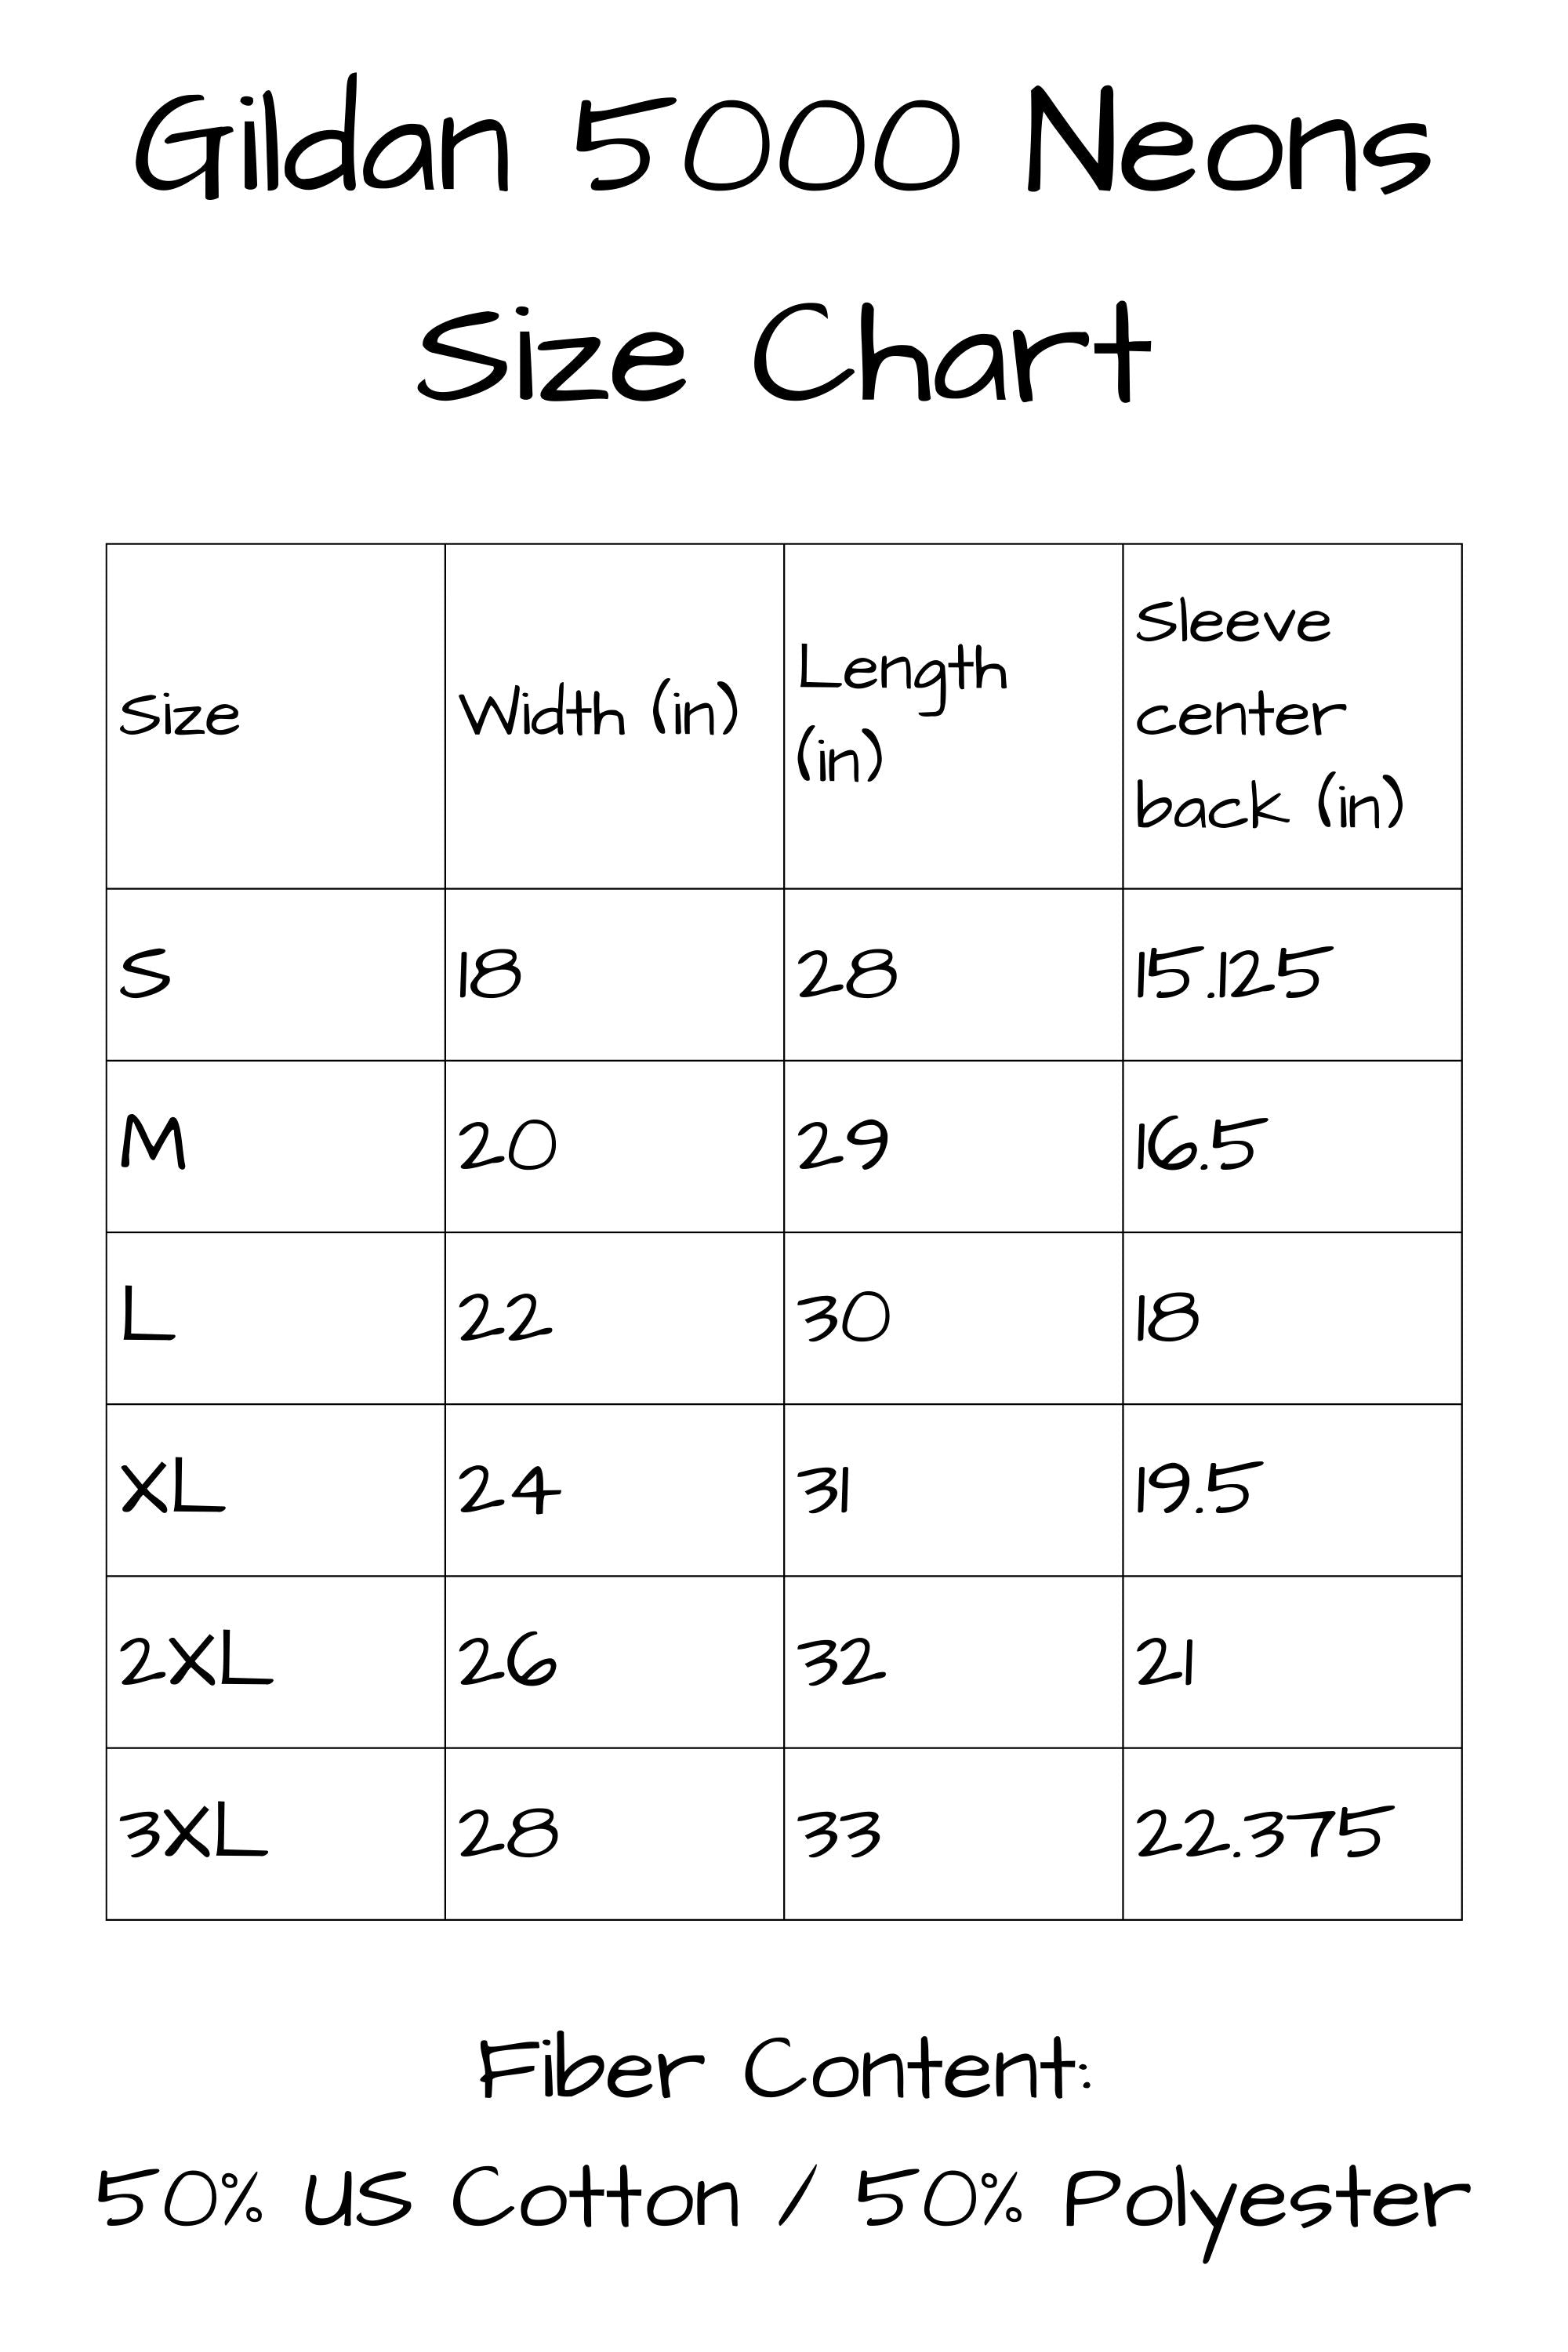 Gildan 5000 Neon T Shirt Sizing Chart. The Width of the shirts in inches as measured just below the sleeve with the shirt laying flat are as follows: small is 18 inches, medium is 20 inches, large is 22 inches, extra large is 24 inches, two x l is 26 inches and 3 x l is 28 inches in width. Fiber content of these t shirts is 50 percent cotton and 50 percent polyester.